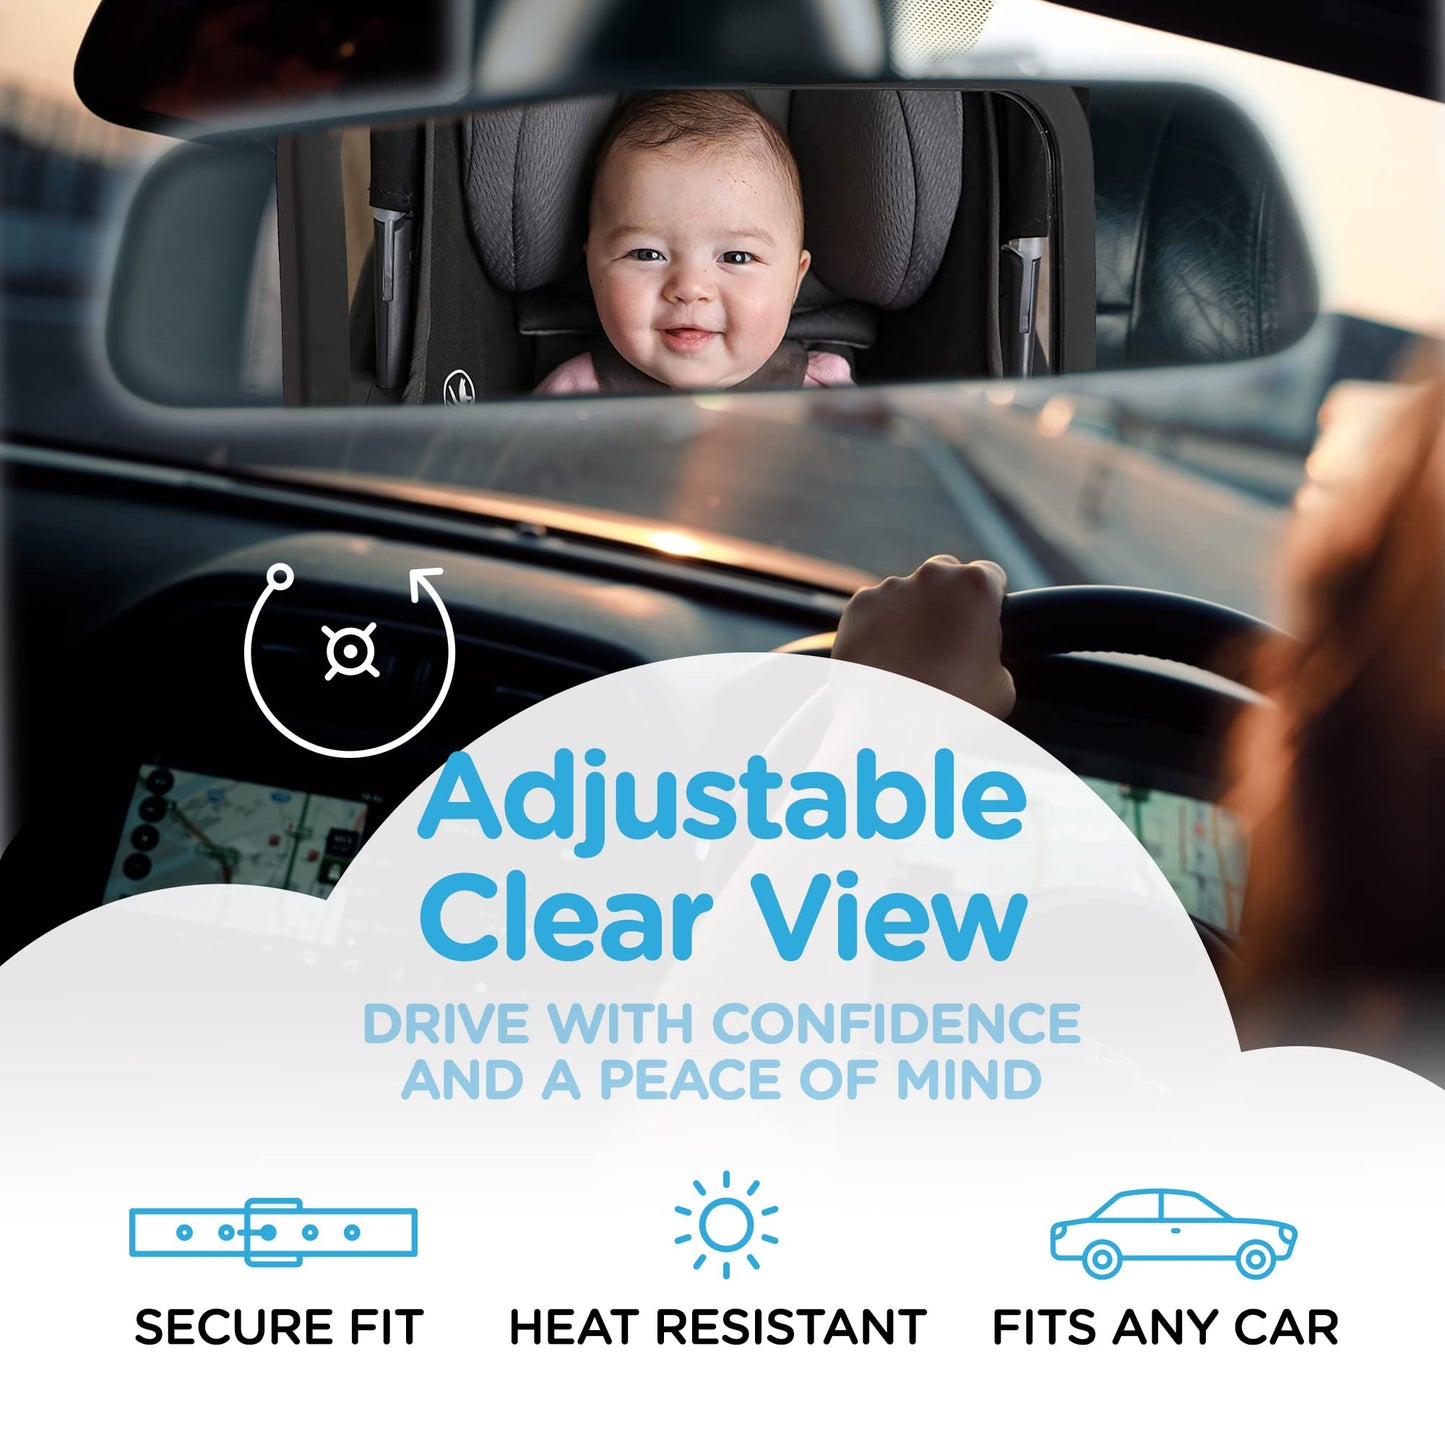 Leo&Ella Home - The Ultimate Baby Car Mirror and Monitor Solution